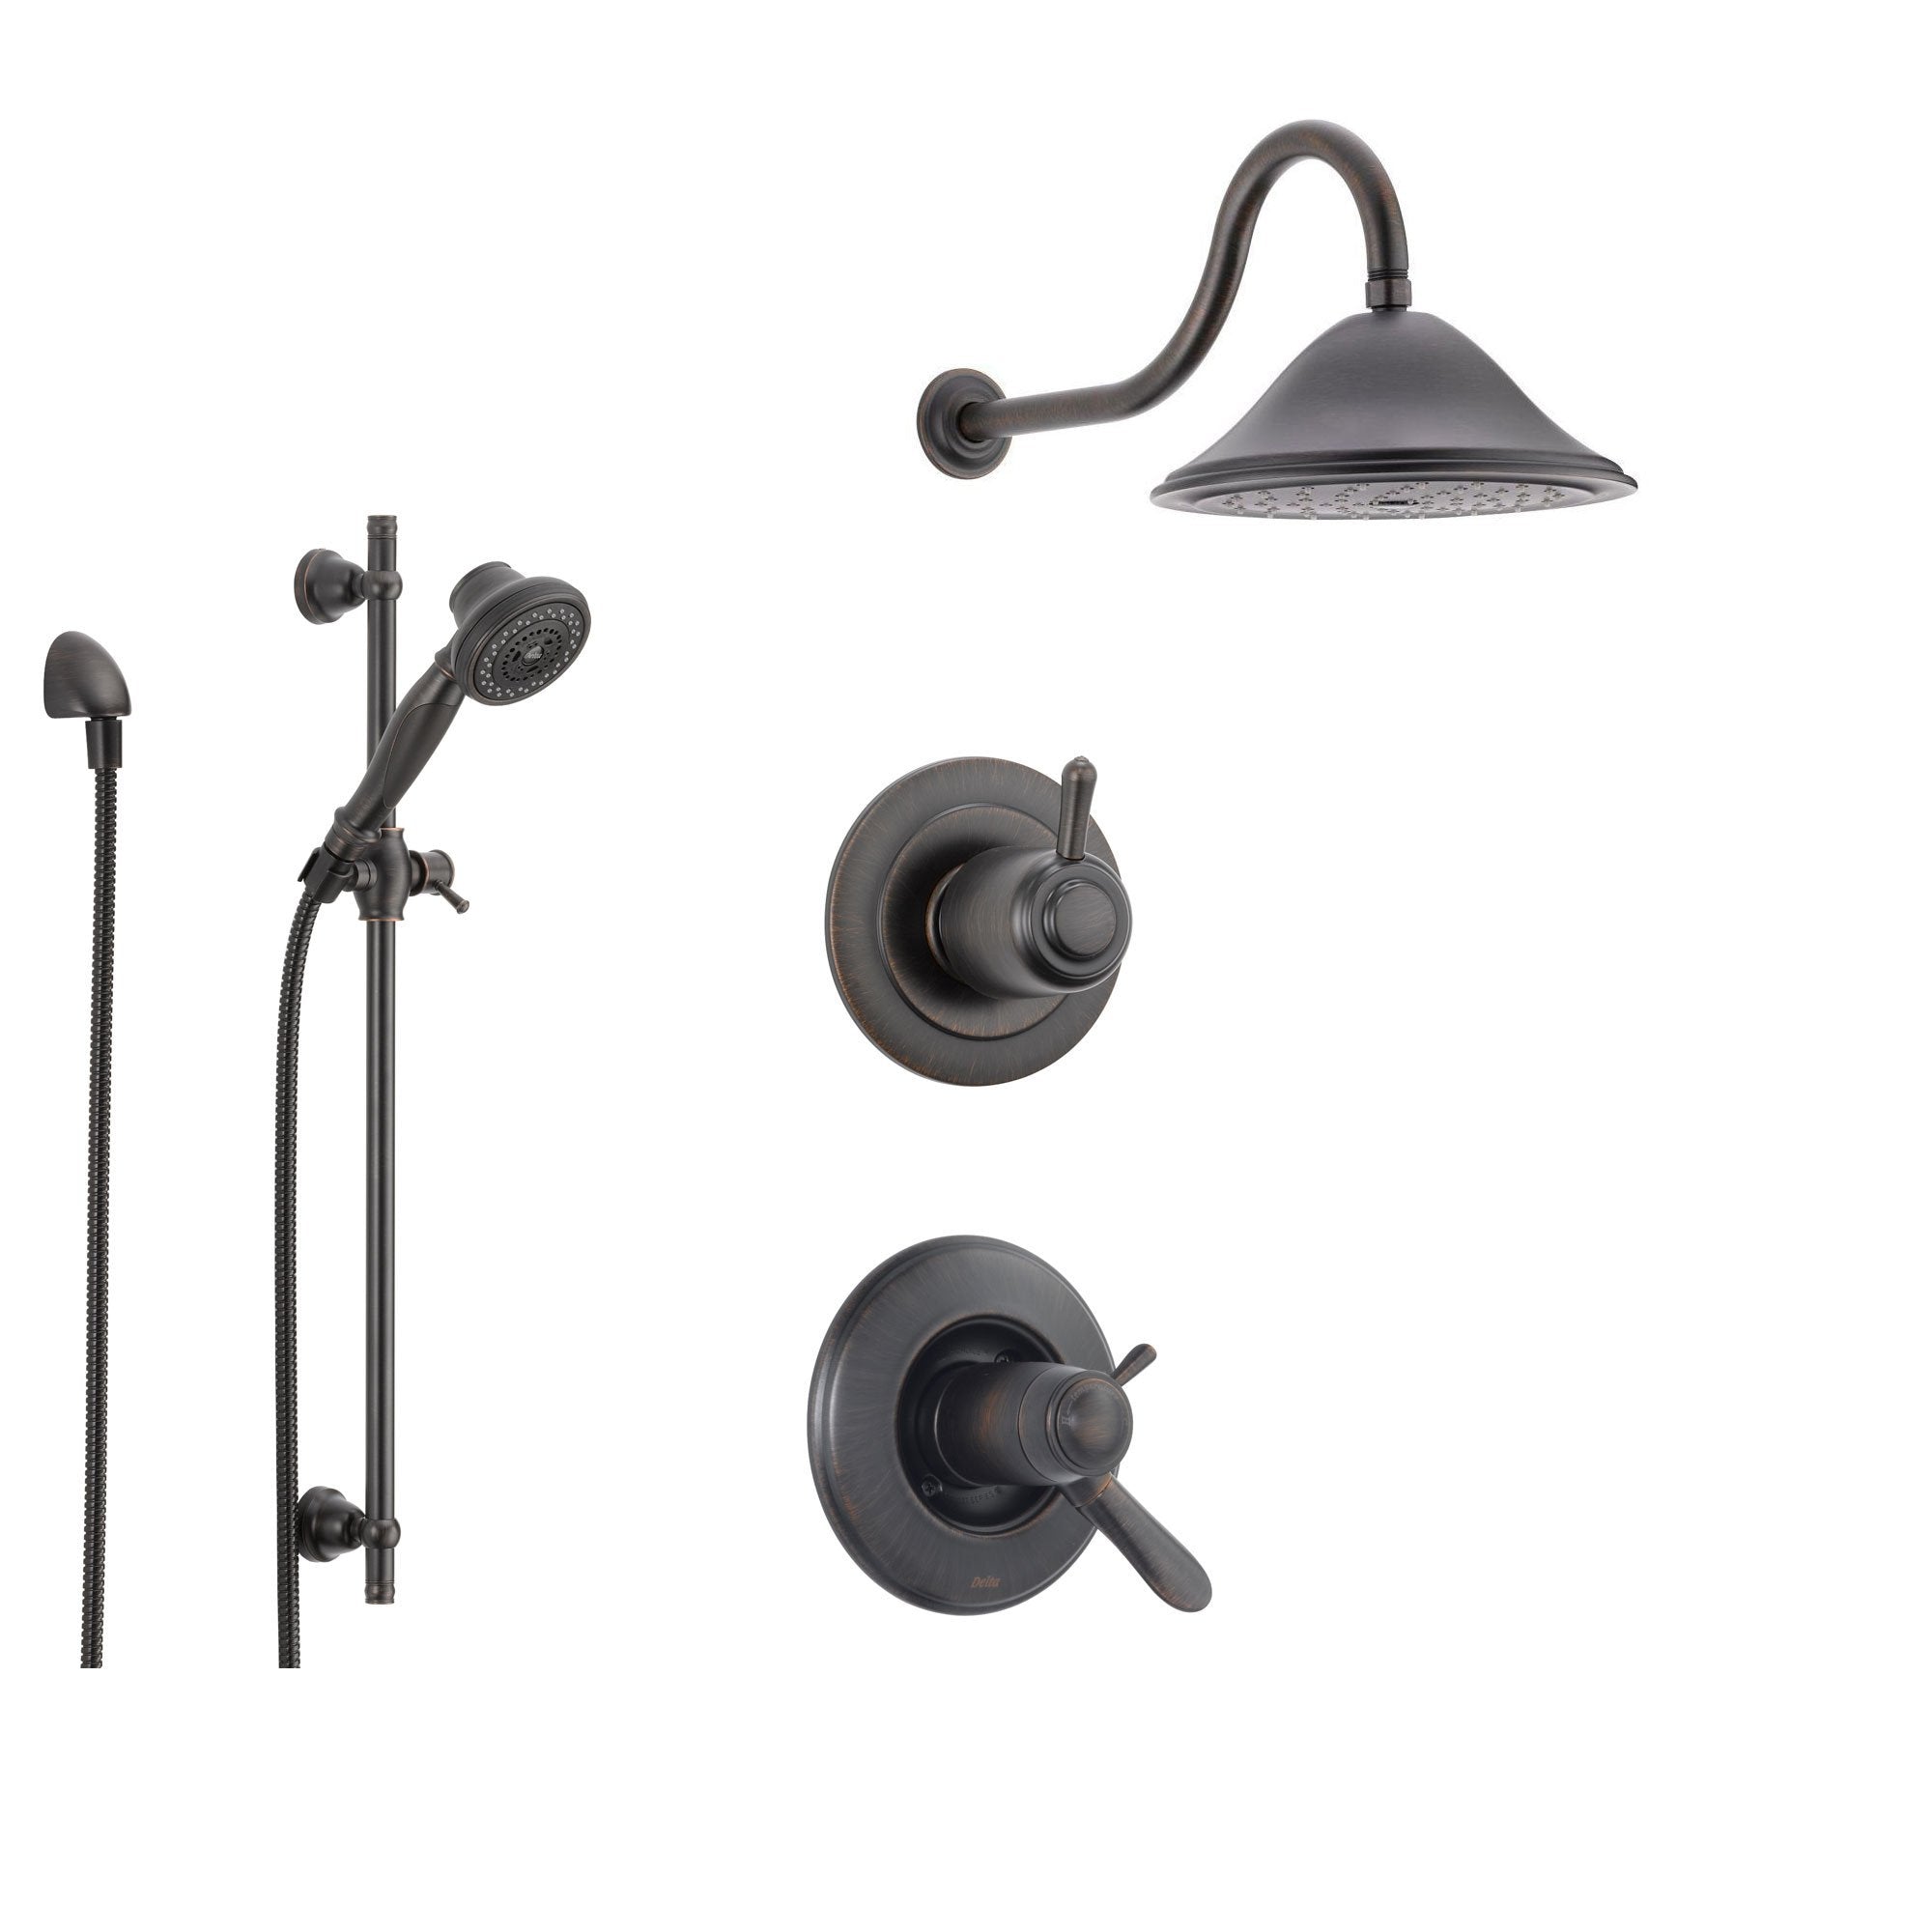 Delta Lahara Venetian Bronze Shower System with Thermostatic Shower Handle, 3-setting Diverter, Large Rain Shower Head, and Handheld Spray SS17T3884RB